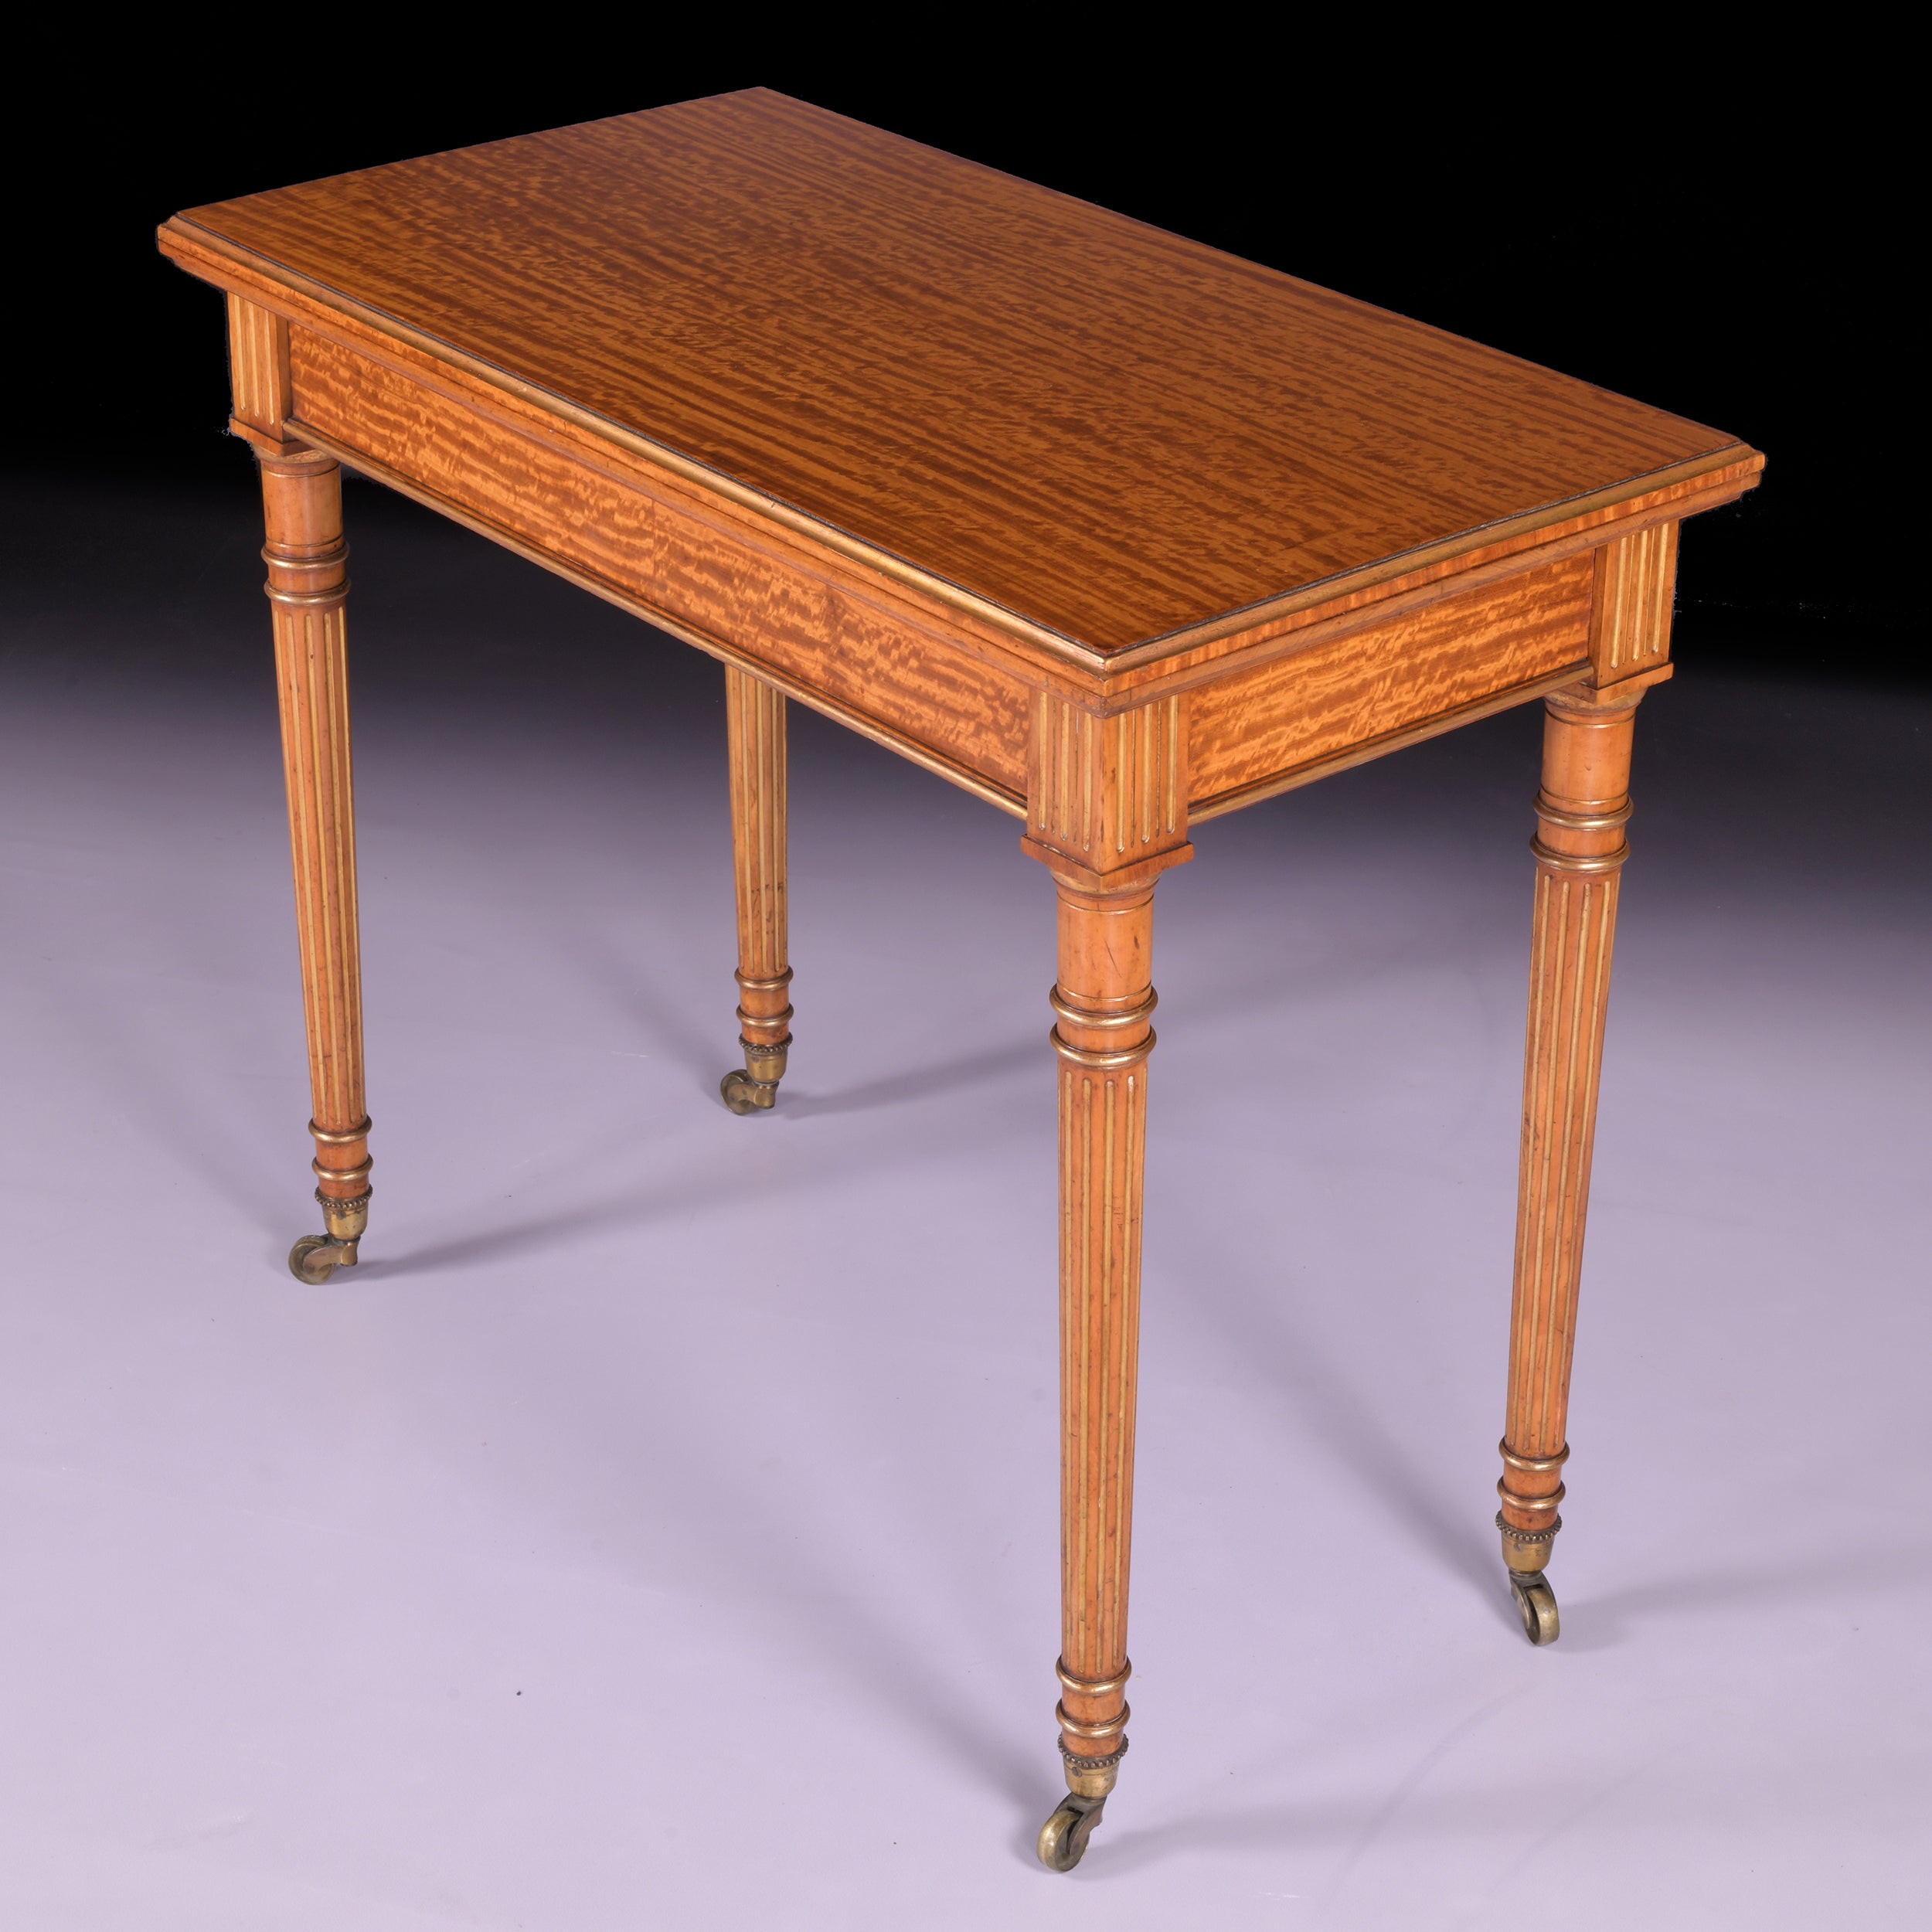 A MAGNIFICENT CARD TABLE BY HOLLAND & SONS - REF No. 9009